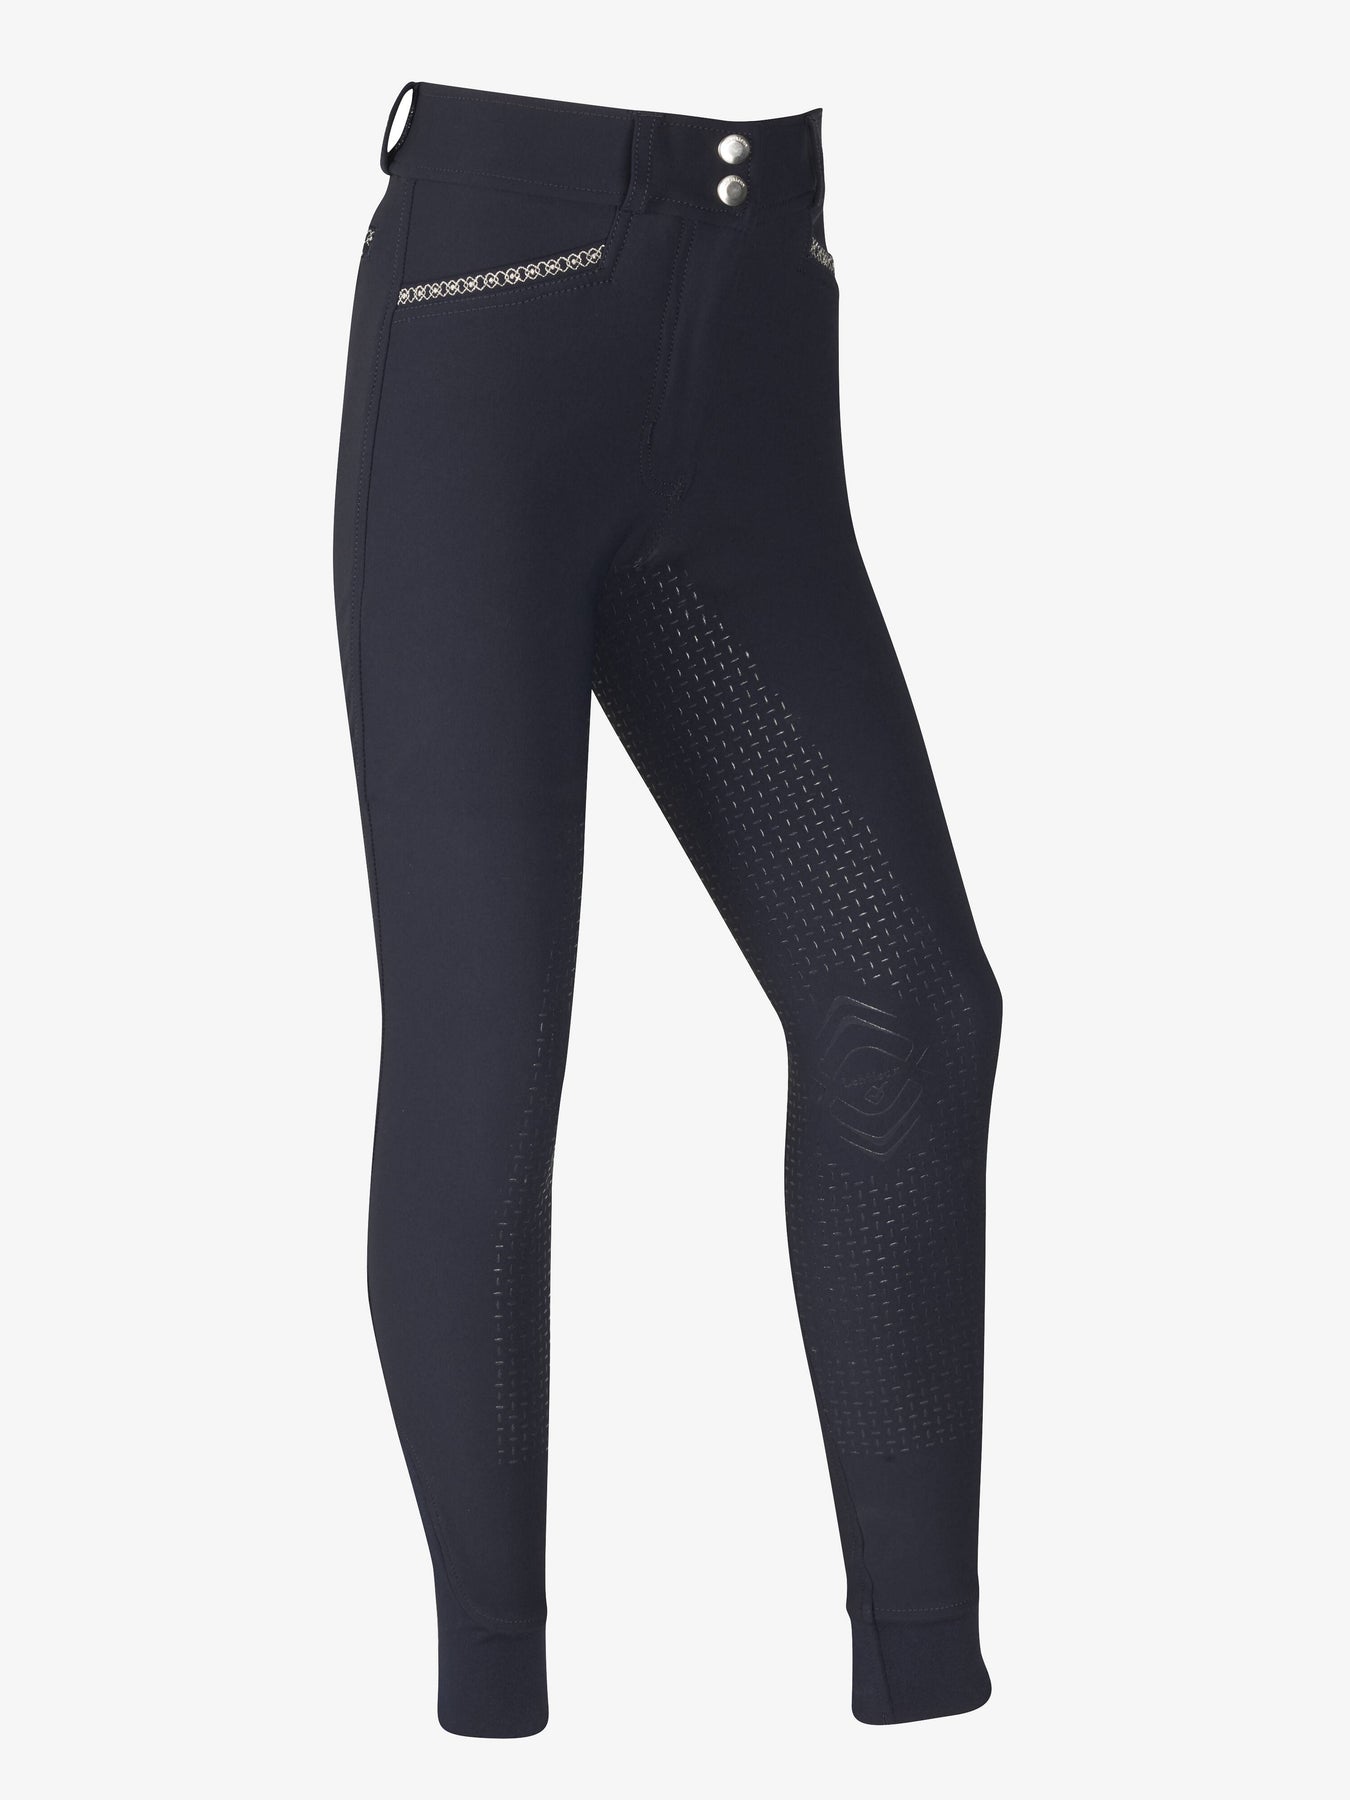 LeMieux Young Rider St. Tropez Breeches – Northern Lights